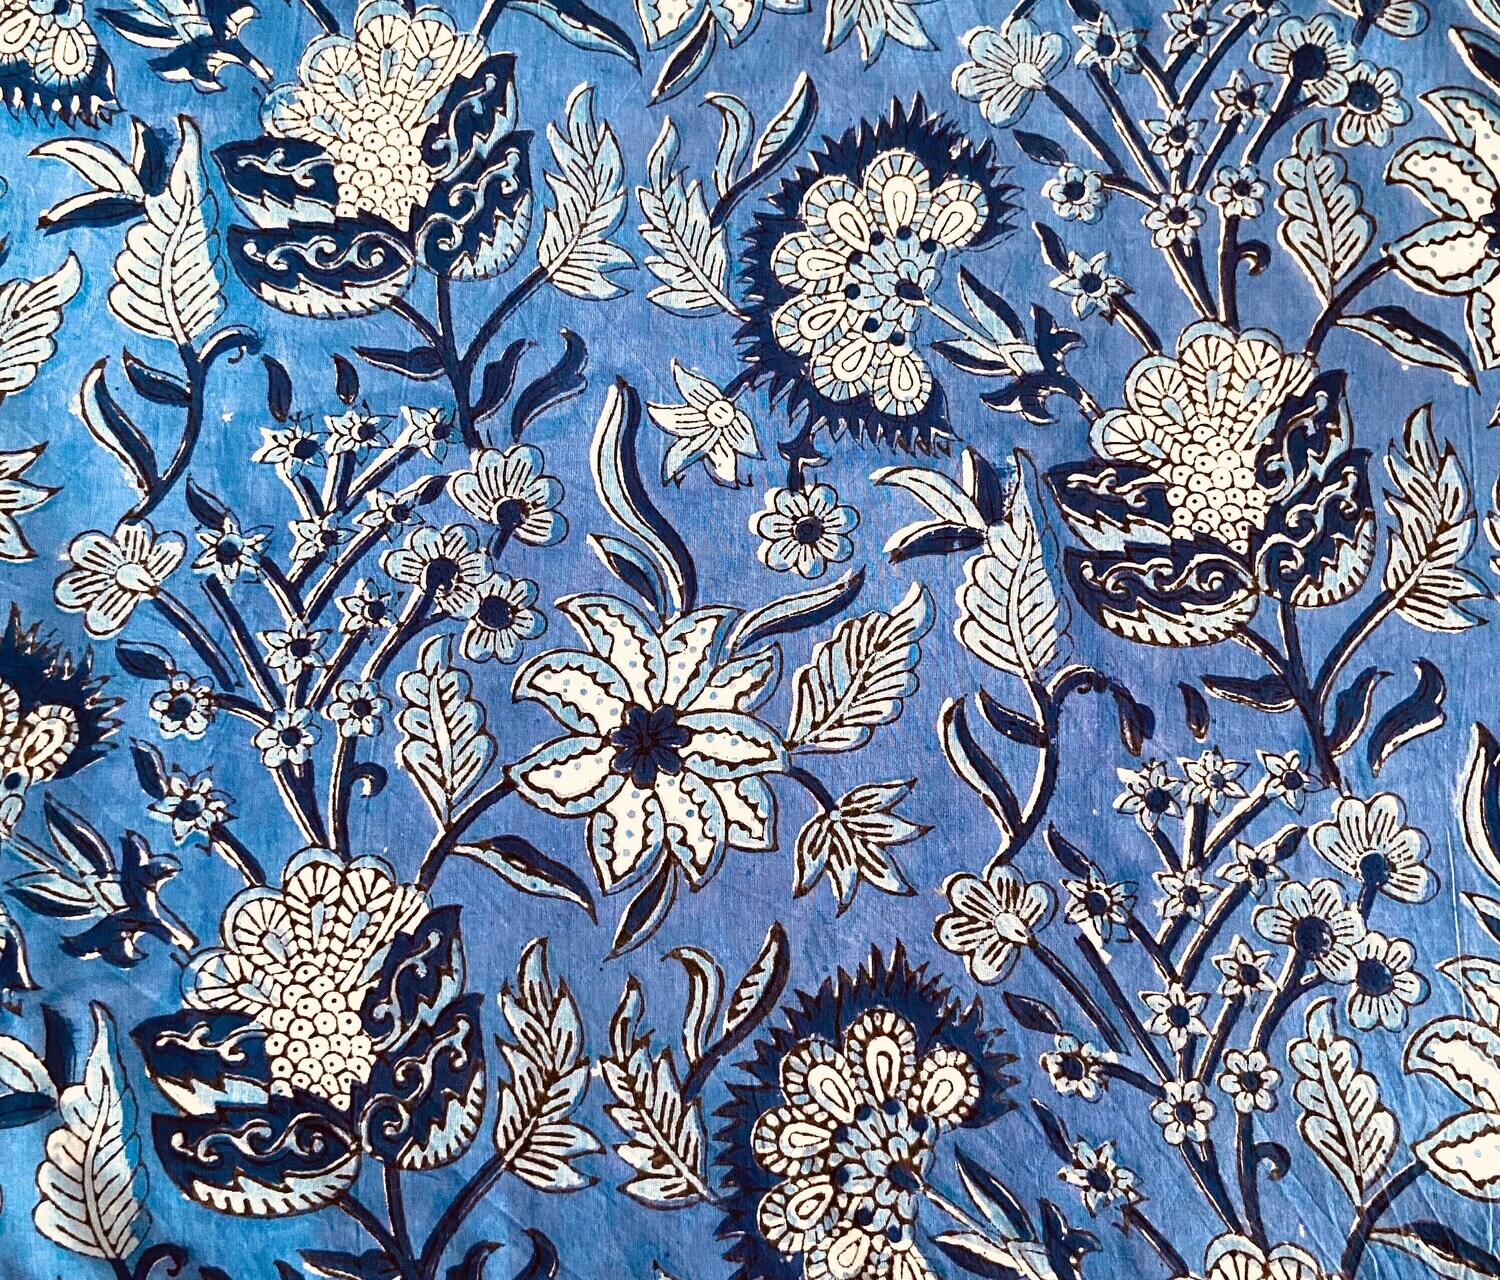 Blue Floral Hand Block Print Indian Cotton Fabric for Sewing Quilting Crafting Fabric, 44 Inch Wide, Sold by Half Yard